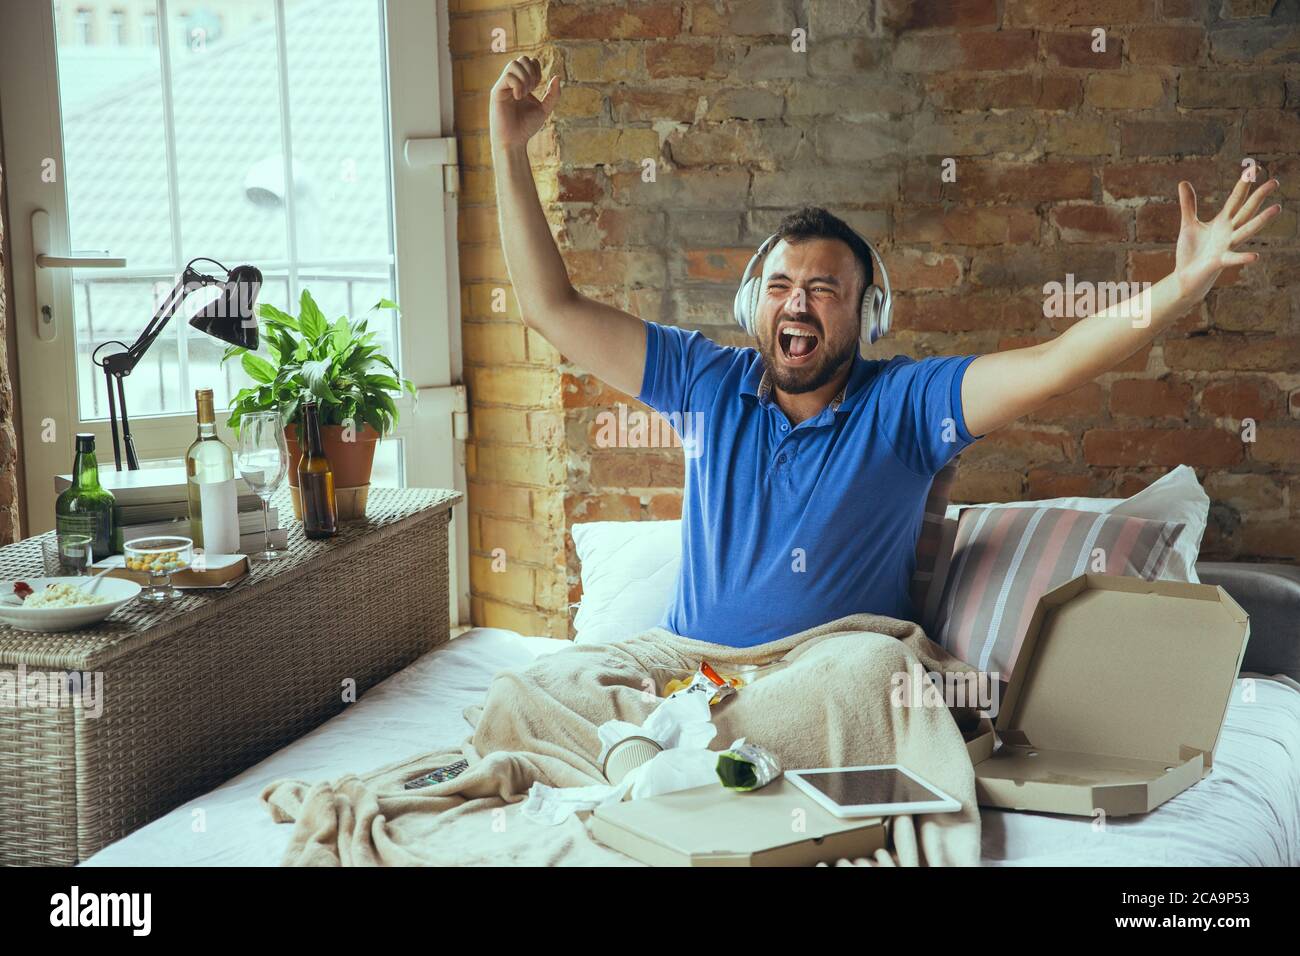 Crazy happy, celebrating win of favourite team. Lazy man living in his bed surrounded with messy. No need to go out to be happy. Using gadgets, watching movie and series, looks emotional. Stock Photo